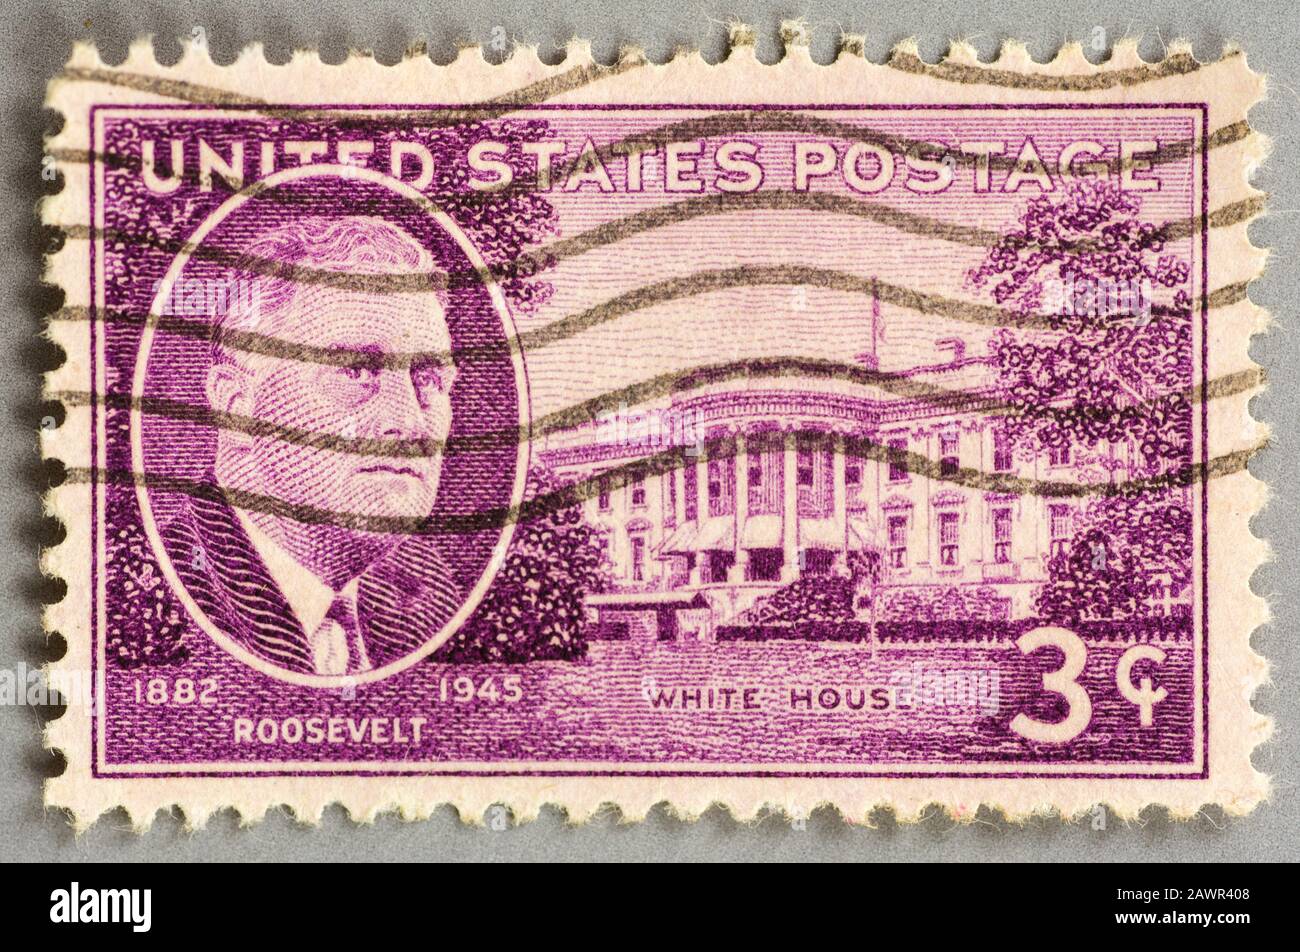 US postage stamp commemorating President Franklin D Roosevelt. 1882-1945. Image shows the White House. Stock Photo